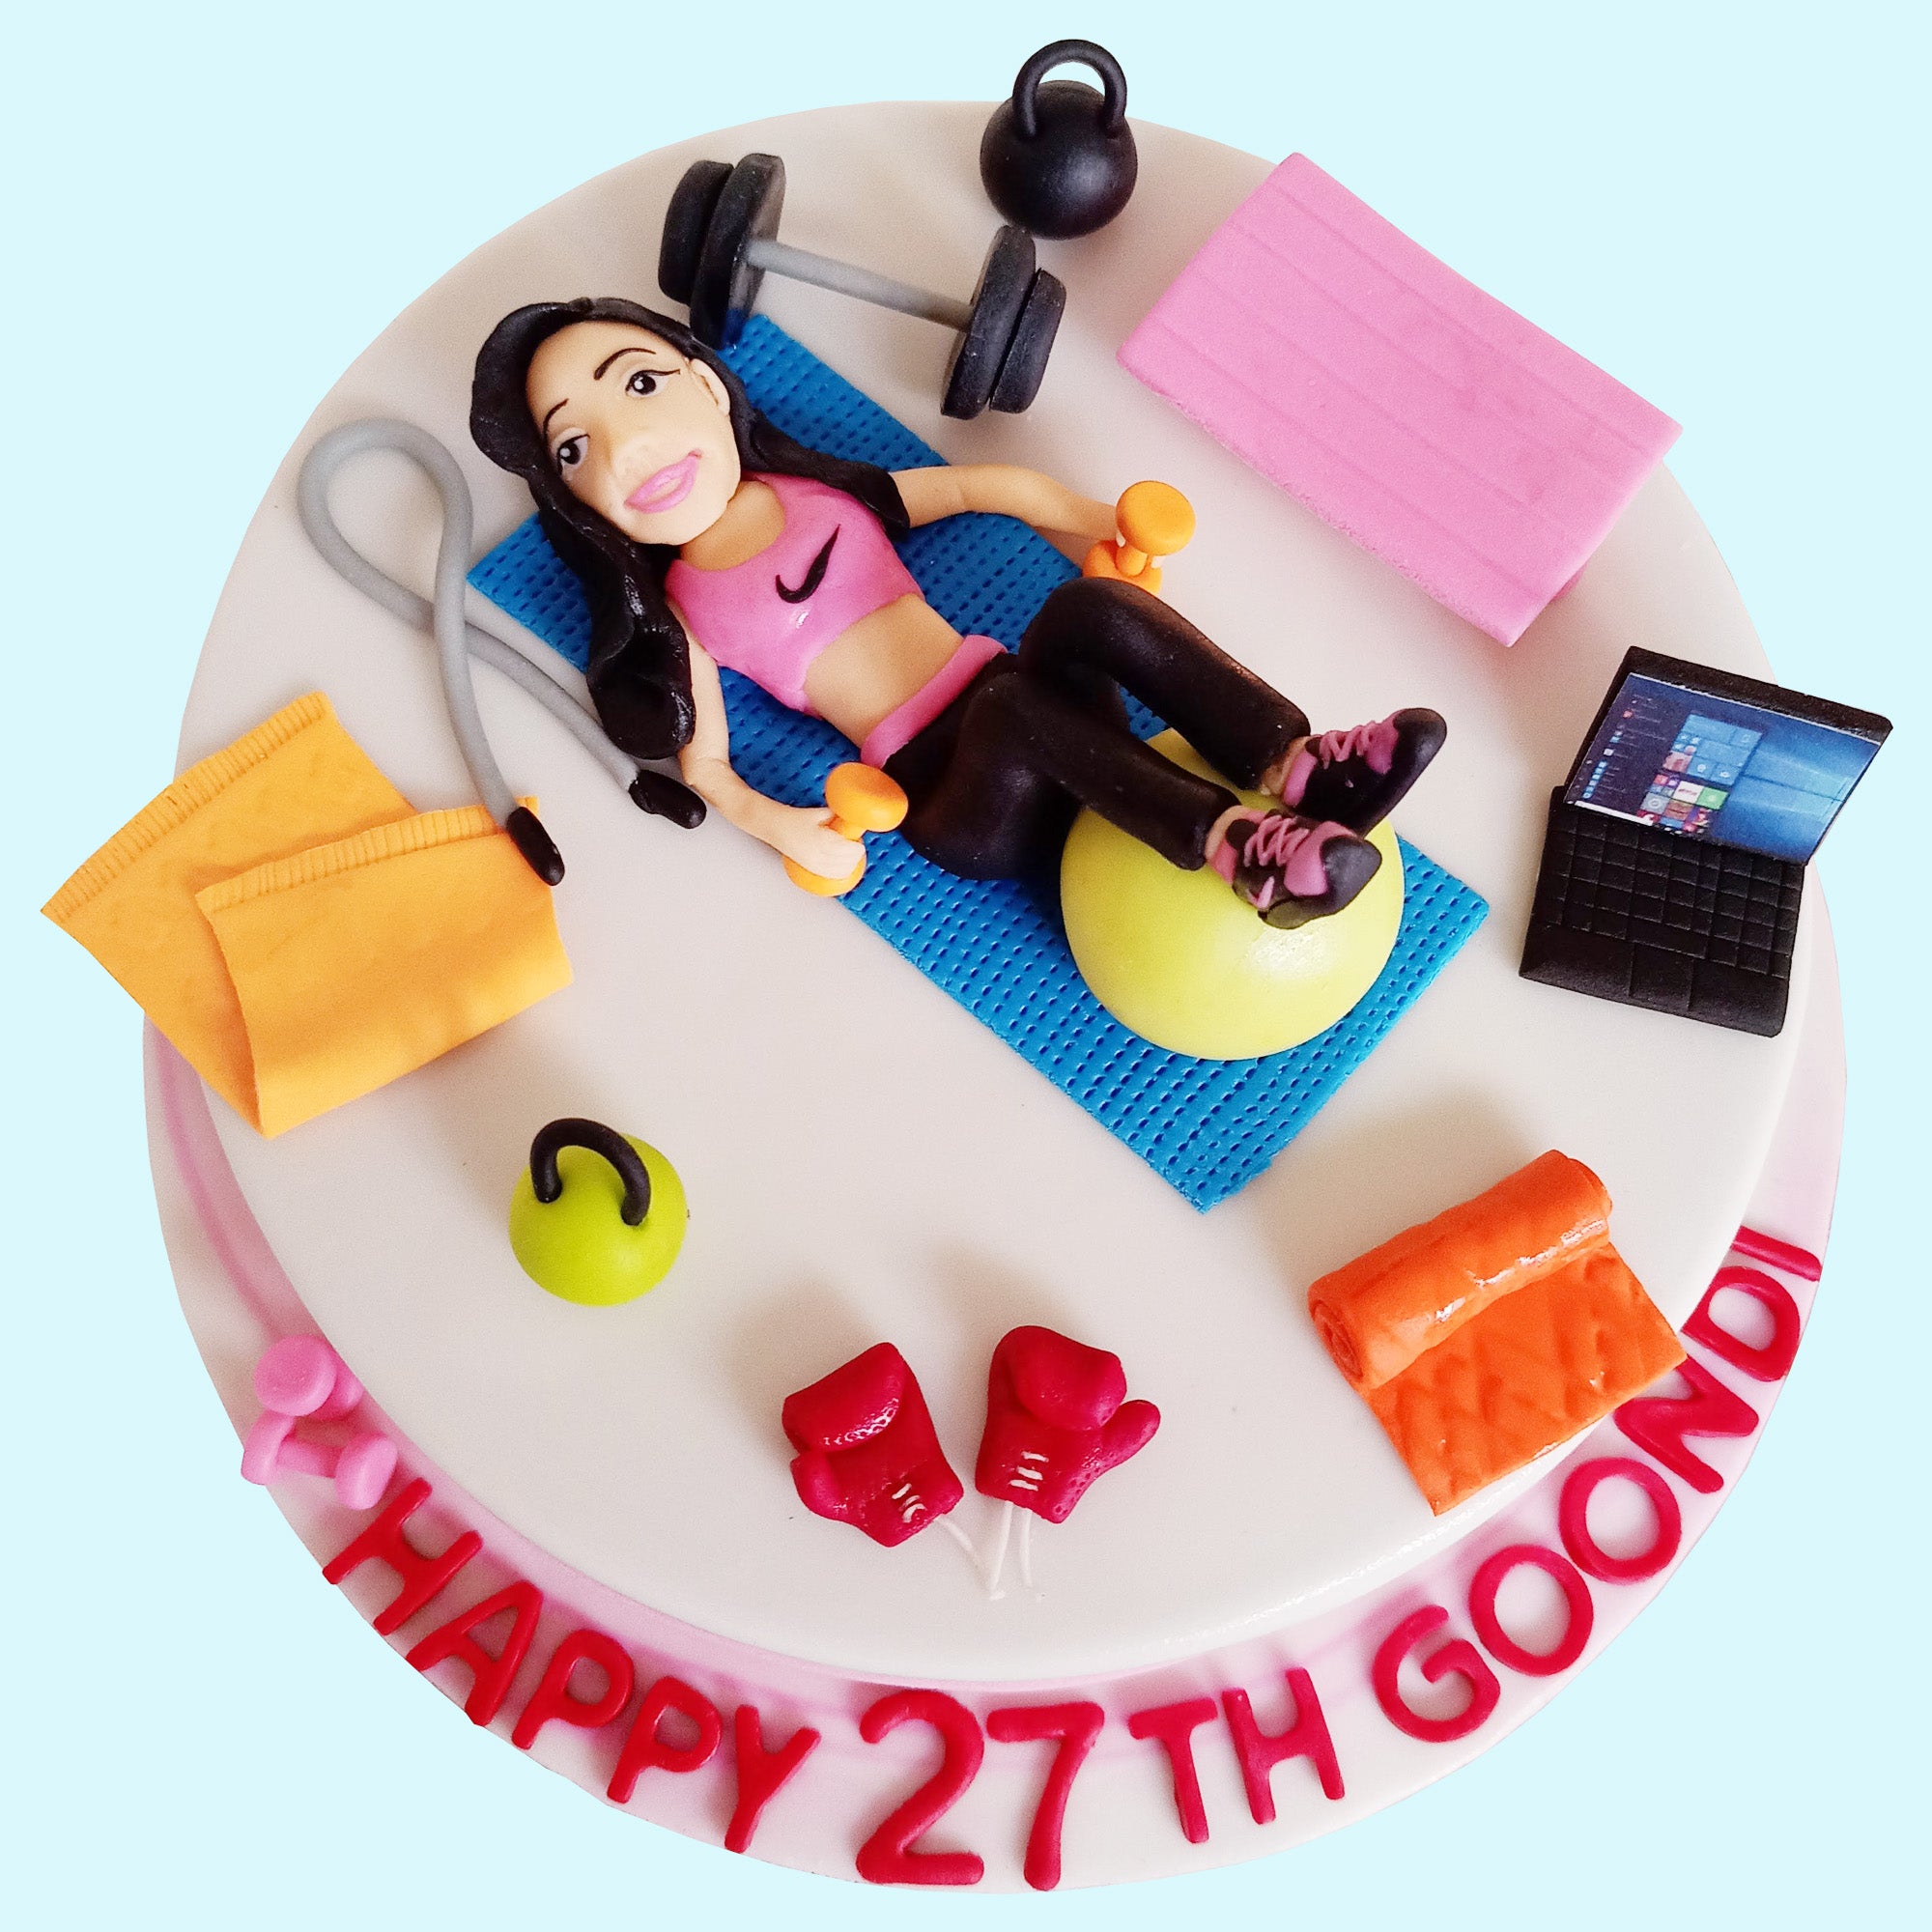 Weightlifting themed cake | Gym cake, Cake, Birthday cakes for men